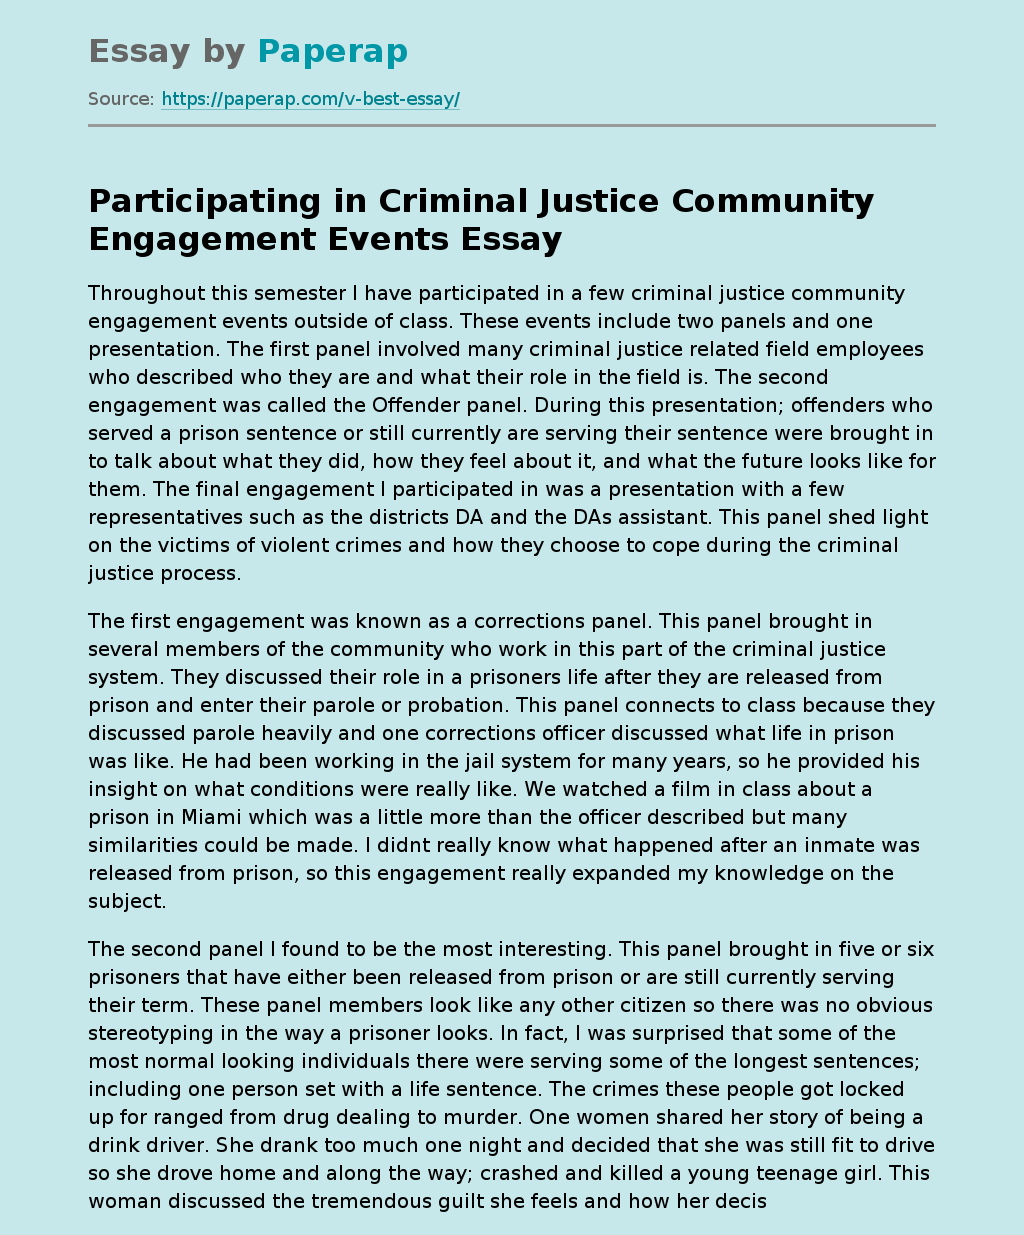 Participating in Criminal Justice Community Engagement Events